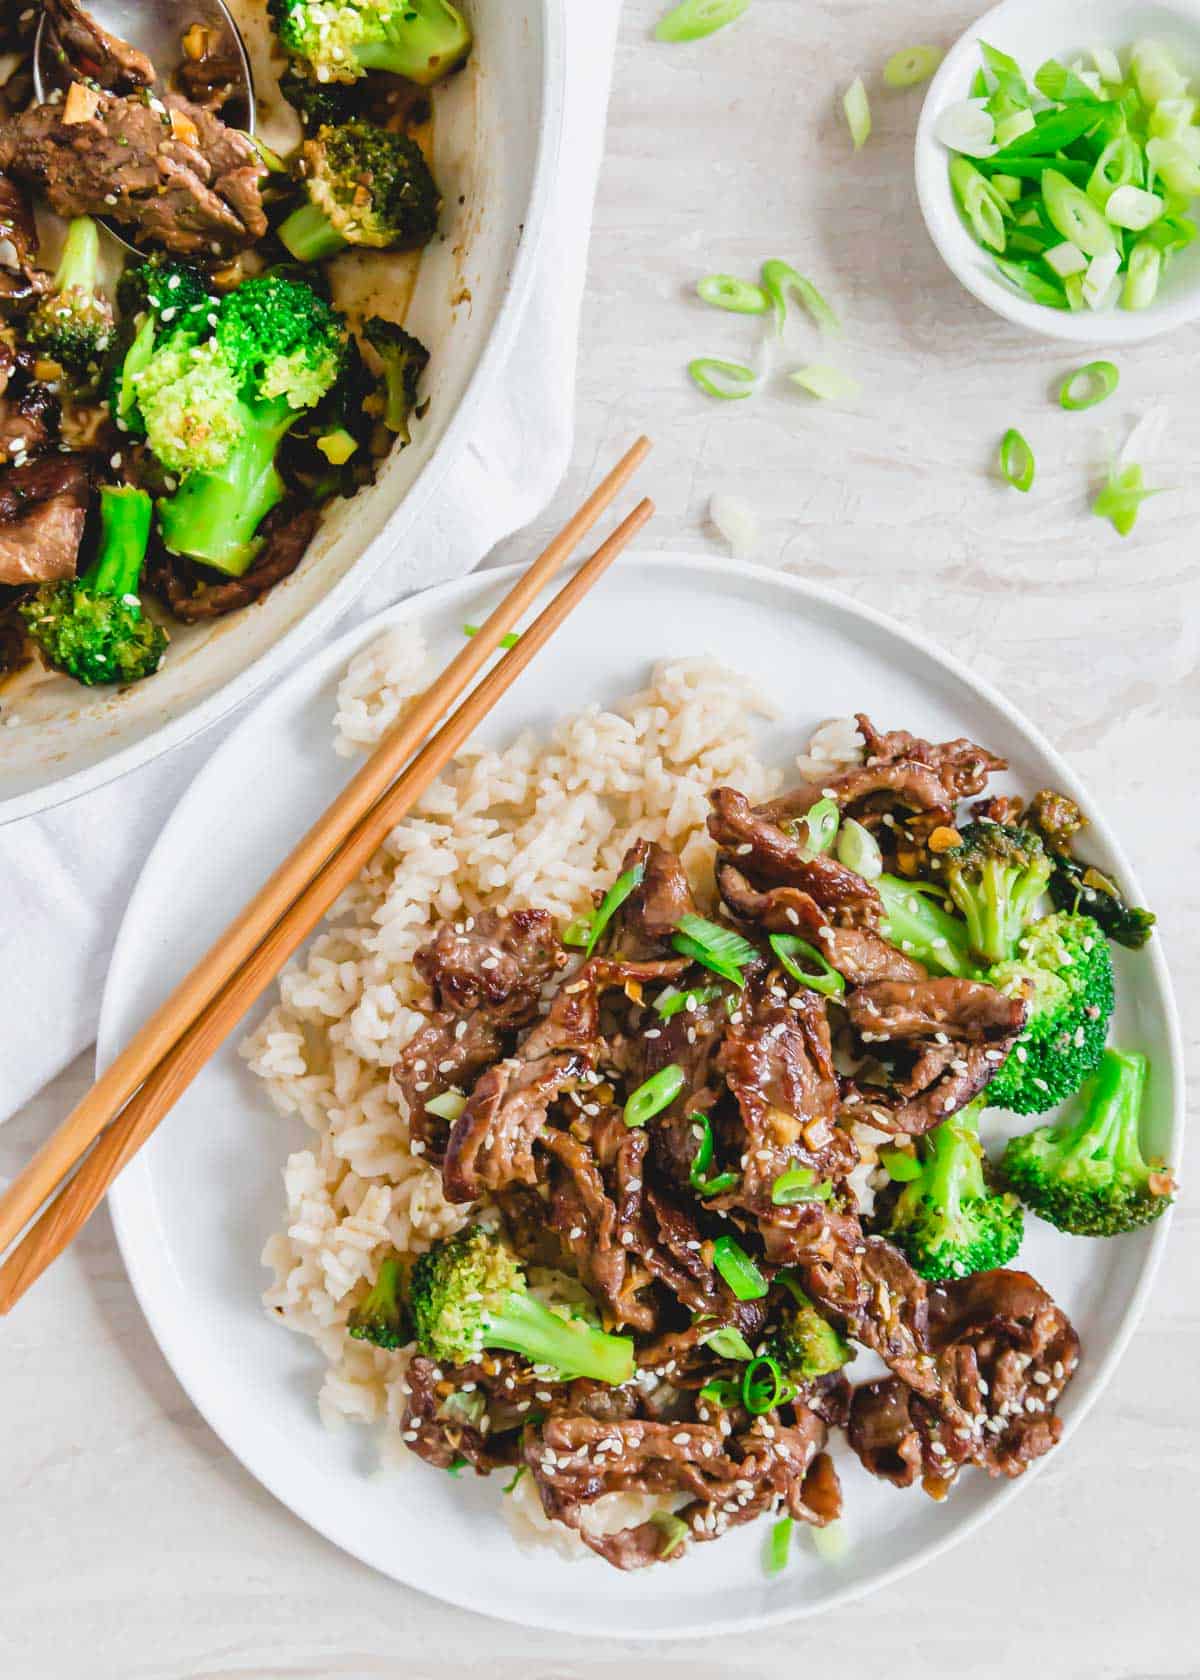 Mongolian shaved beef and broccoli recipe served with rice on a plate with chopsticks.